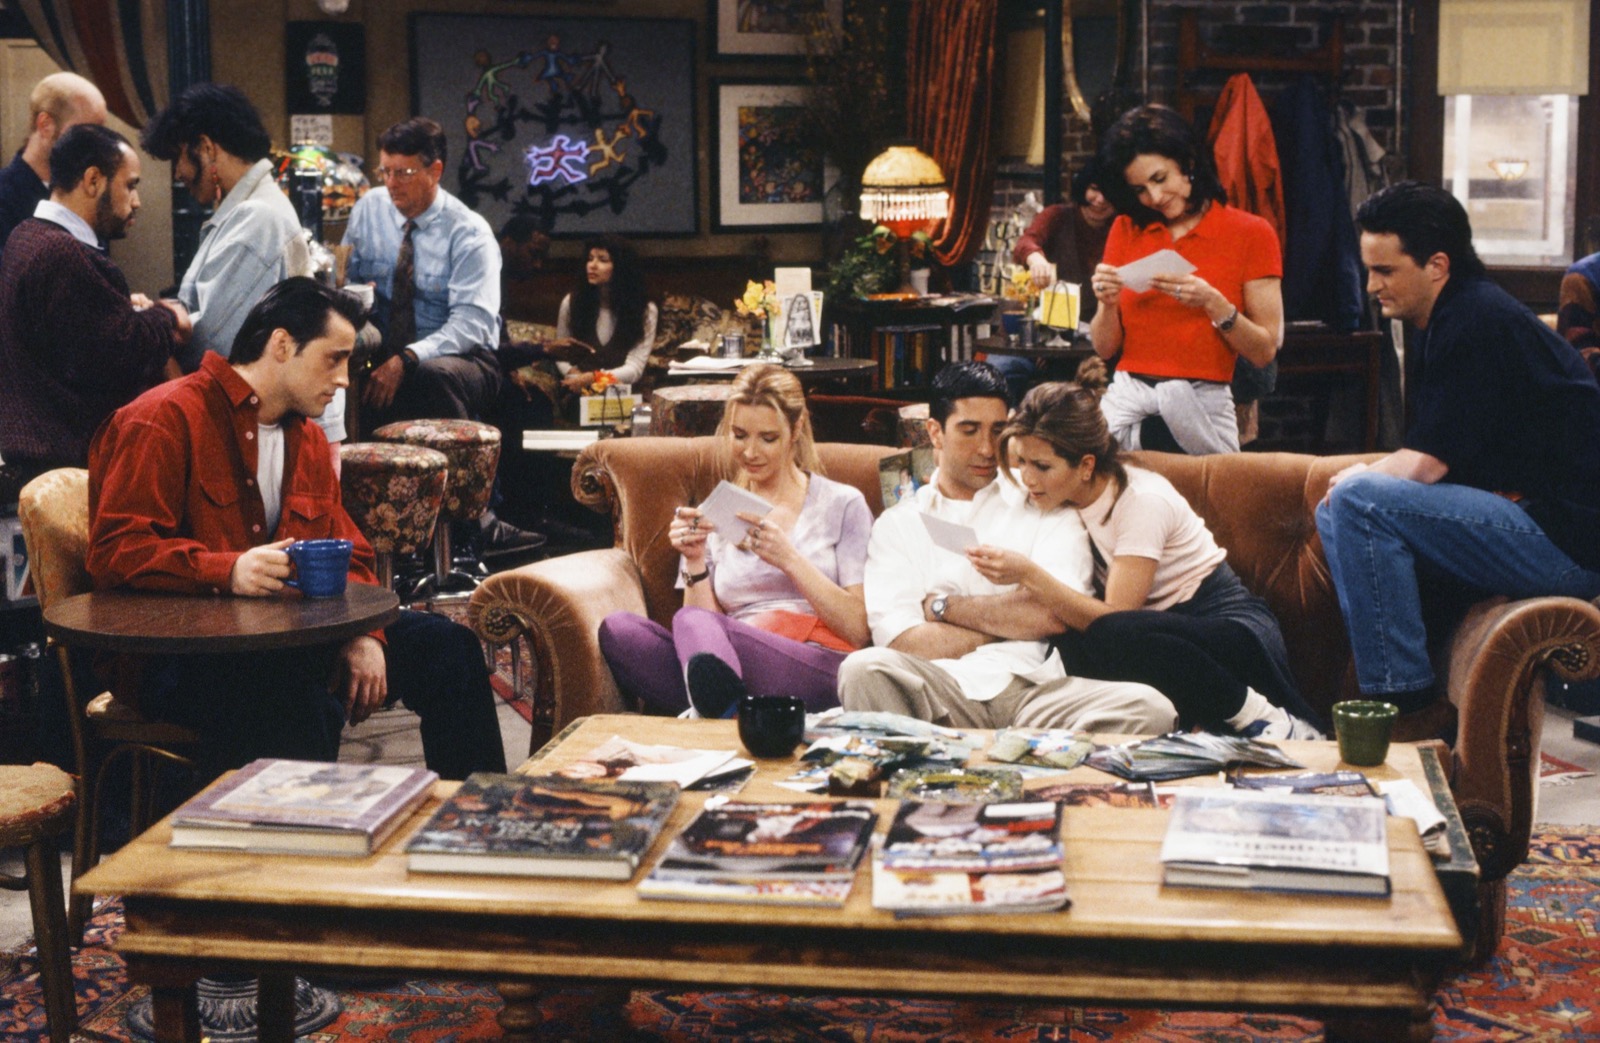 Remove 1 Character from These Famous TV Shows to Find Out What Award You’ll Win Friends TV show Coffee Shop